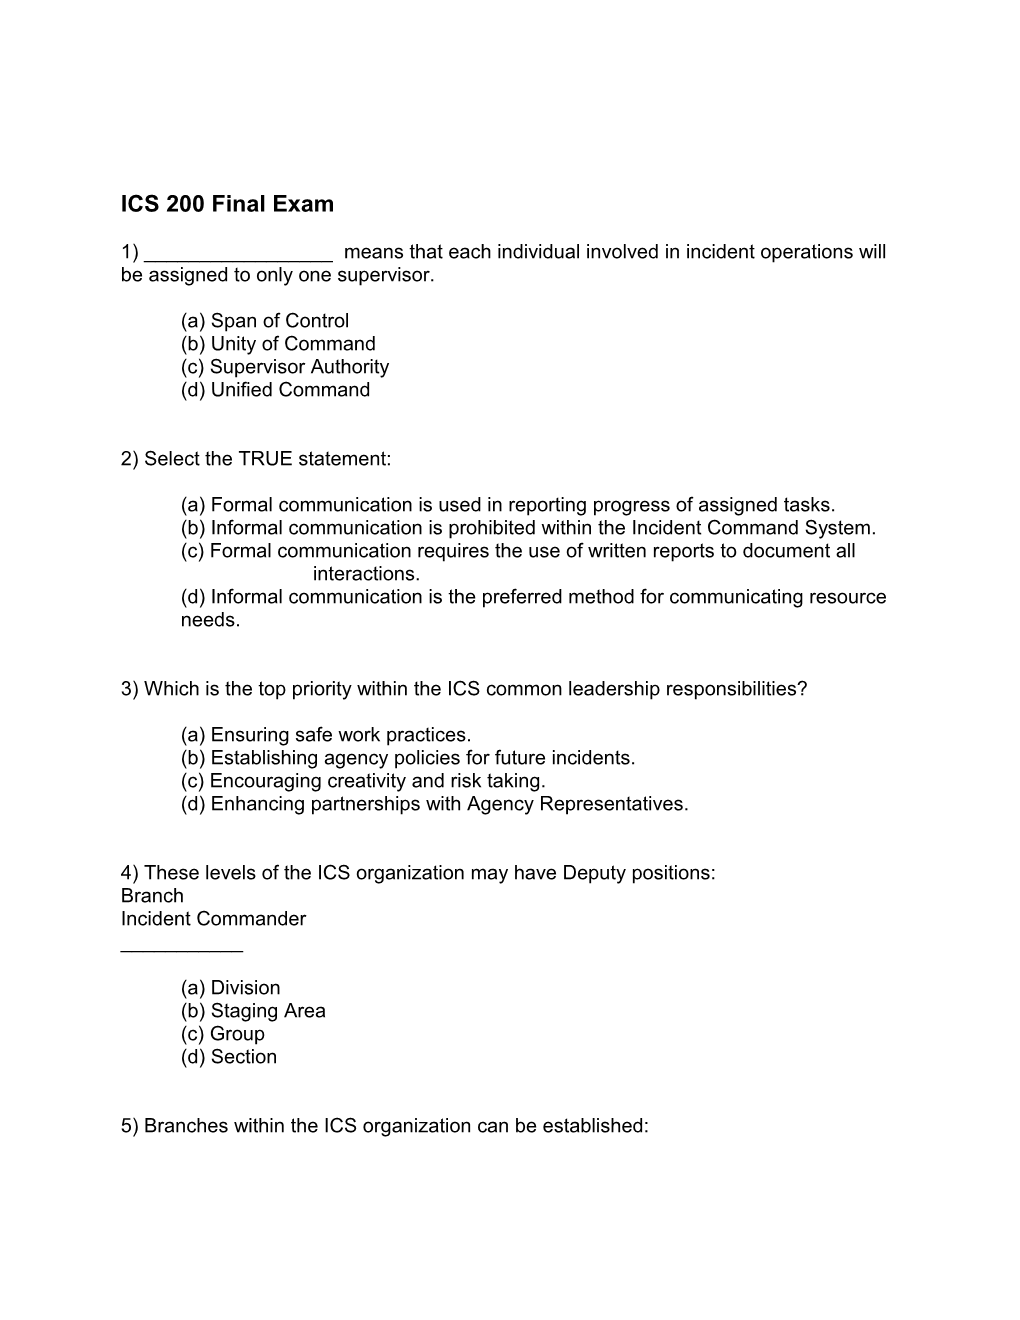 ICS 200 Learning Objectives and Exam Questions